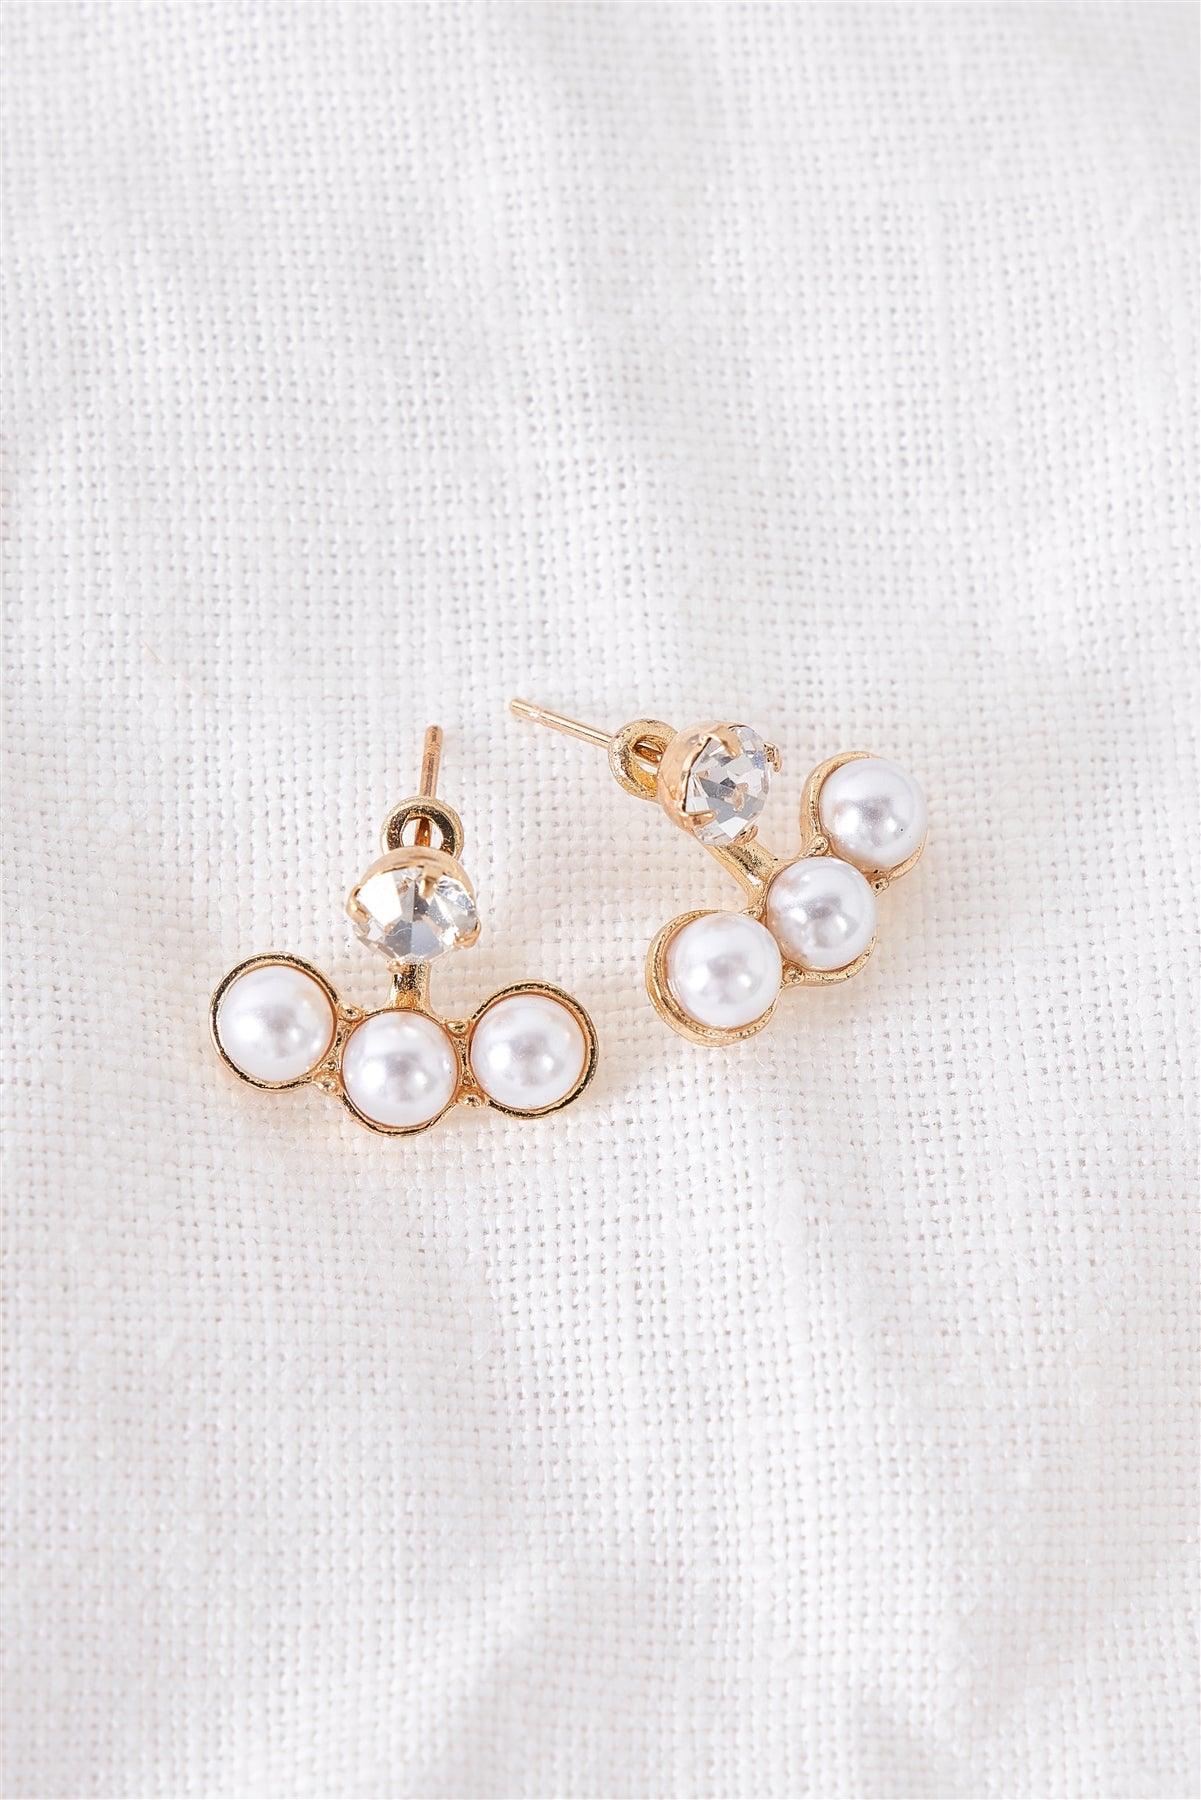 Front Back Gold Tripple Pearl Faux Diamond Stud Earrings /3 Pairs